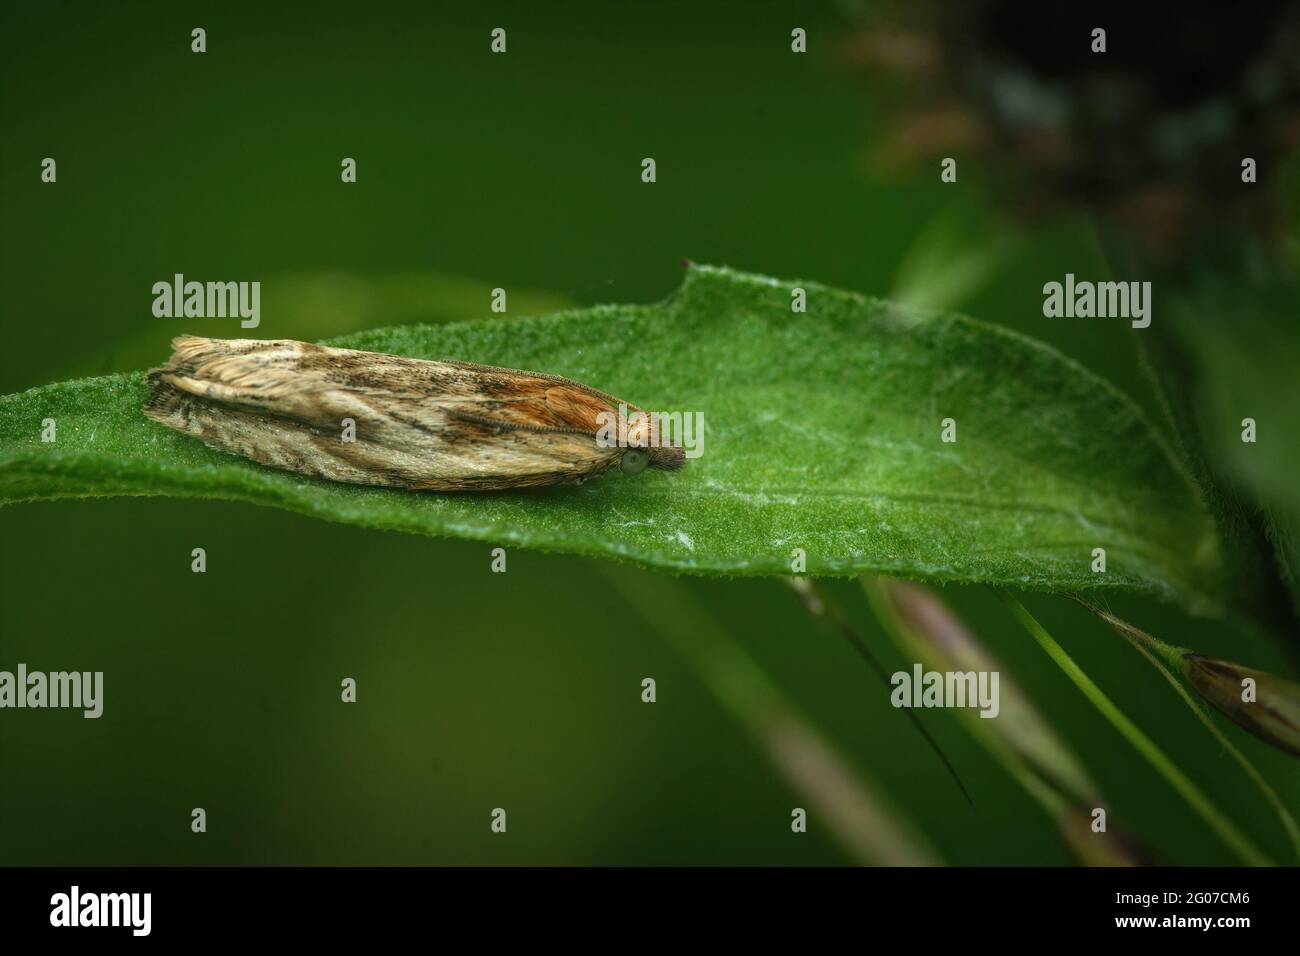 Selective focus of a micro moth on the surface of a green leaf Stock Photo